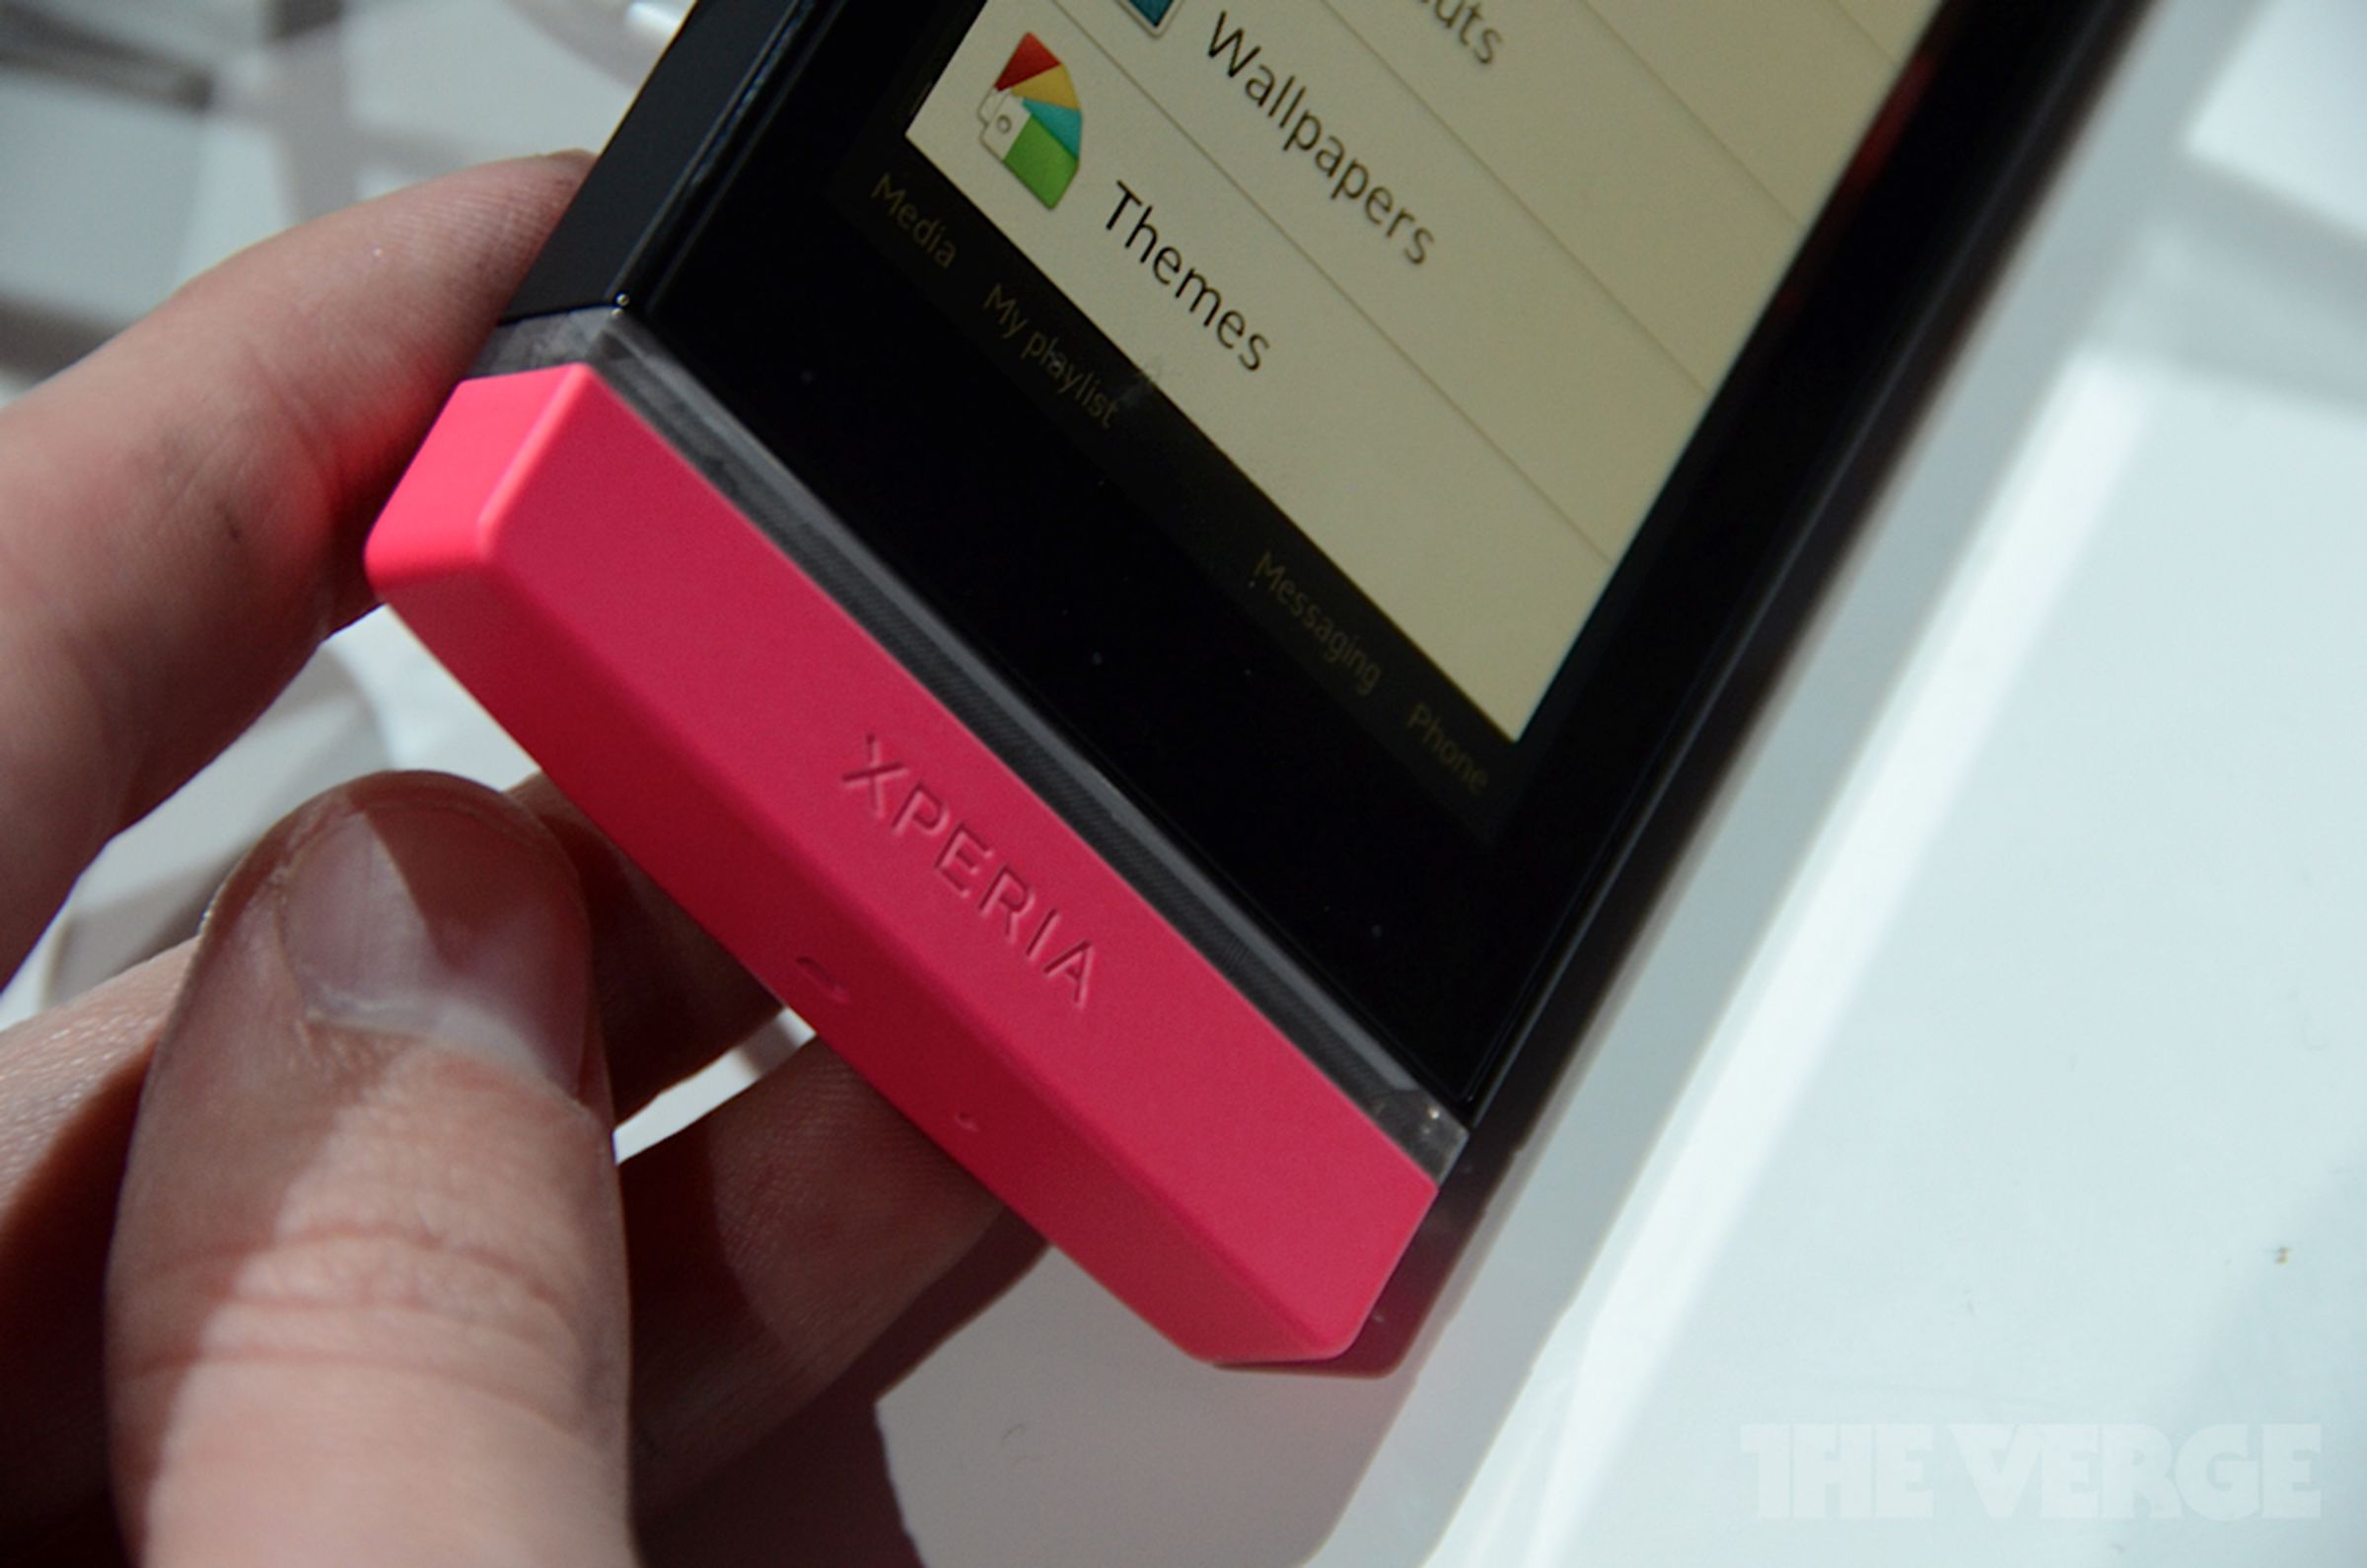 Sony Xperia U hands-on pictures